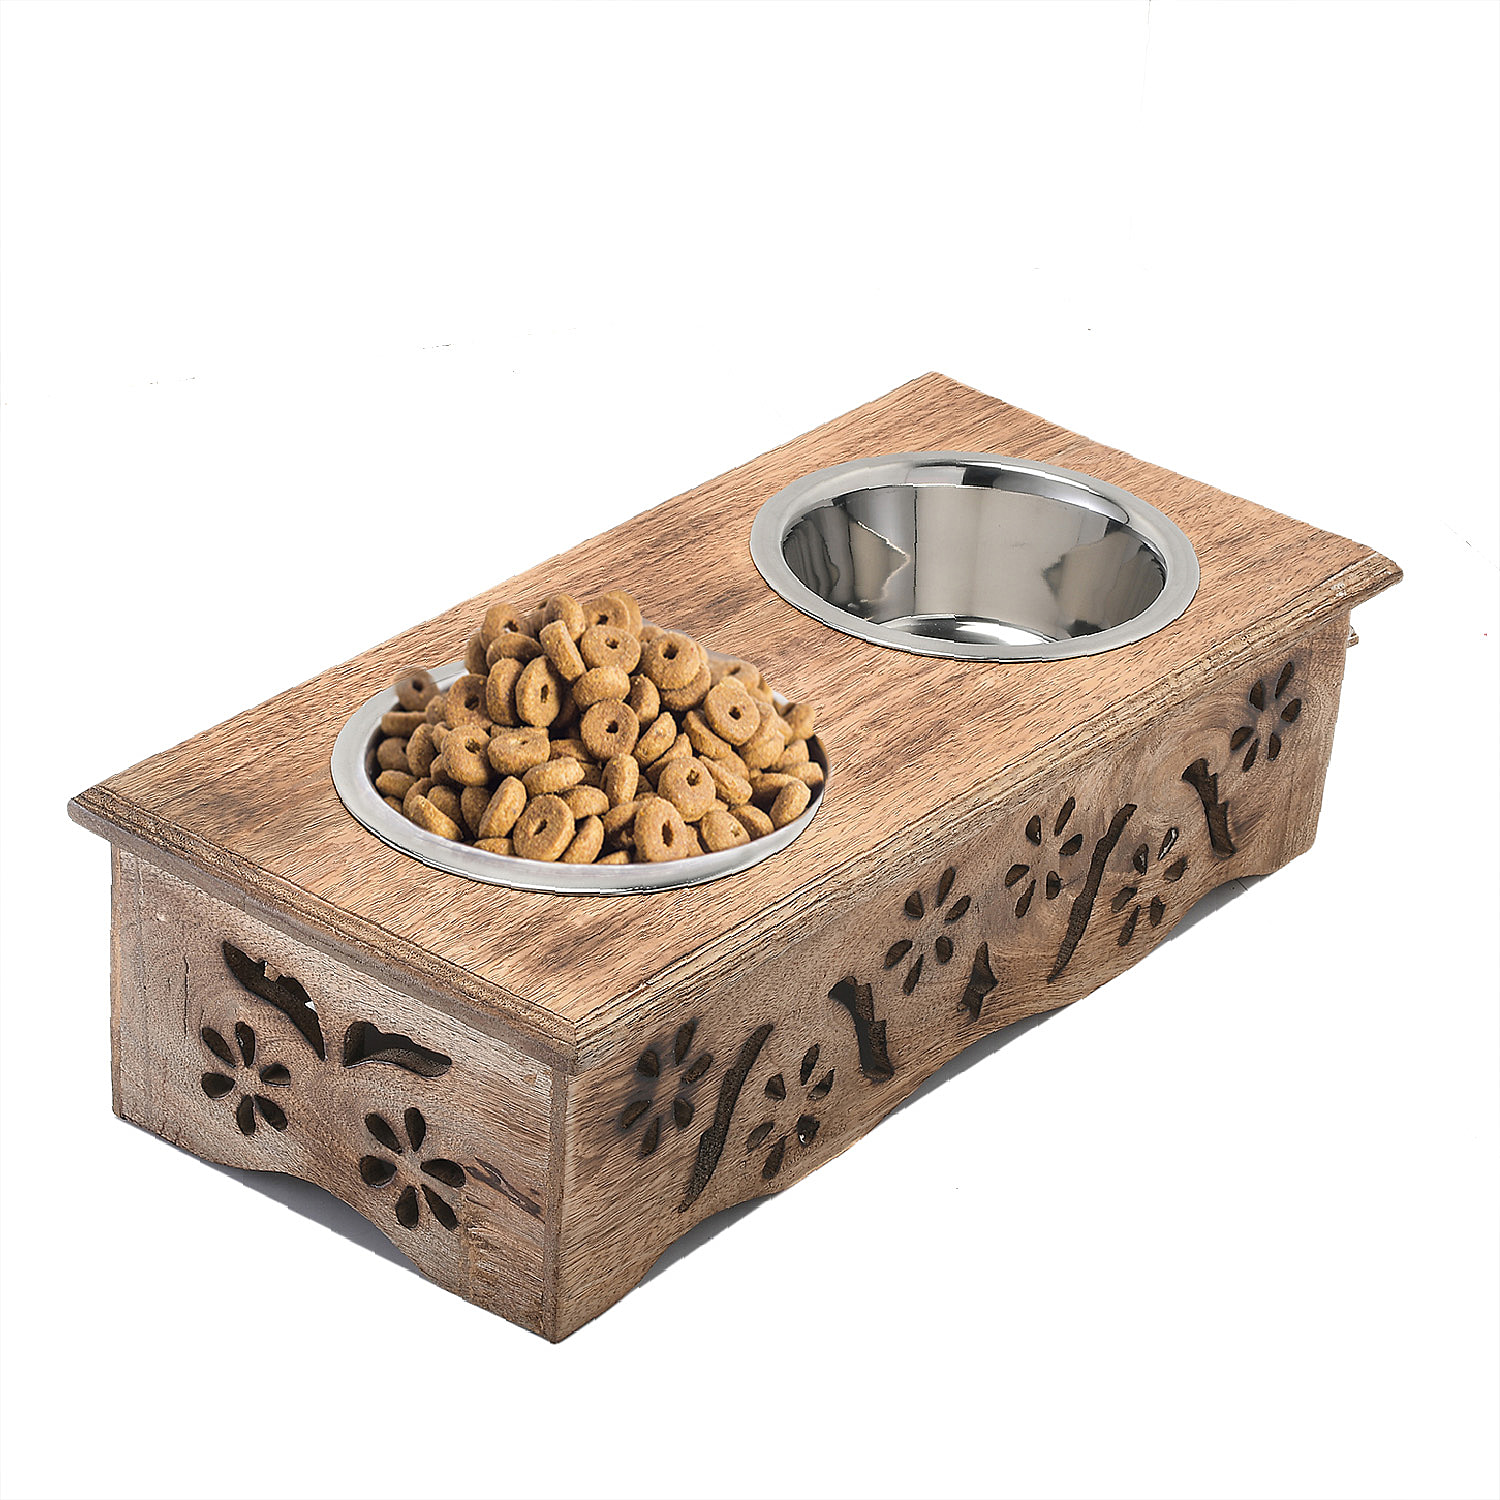 NAKKASHI Hand Carved Mango Wood Pet Feeder with Stainless Steel Bowls